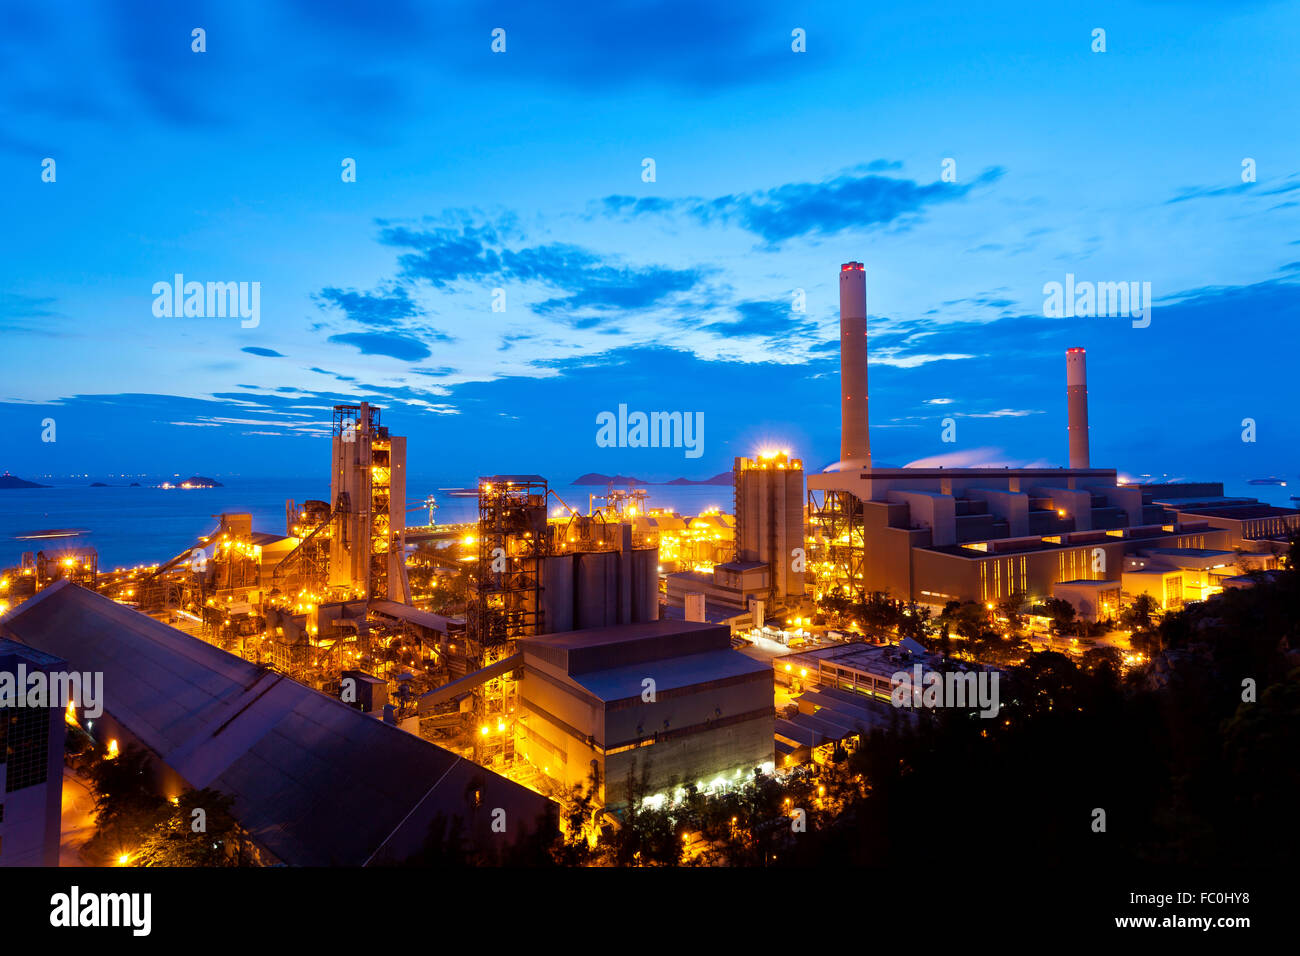 Petrochemical oil refinery plant at night Stock Photo